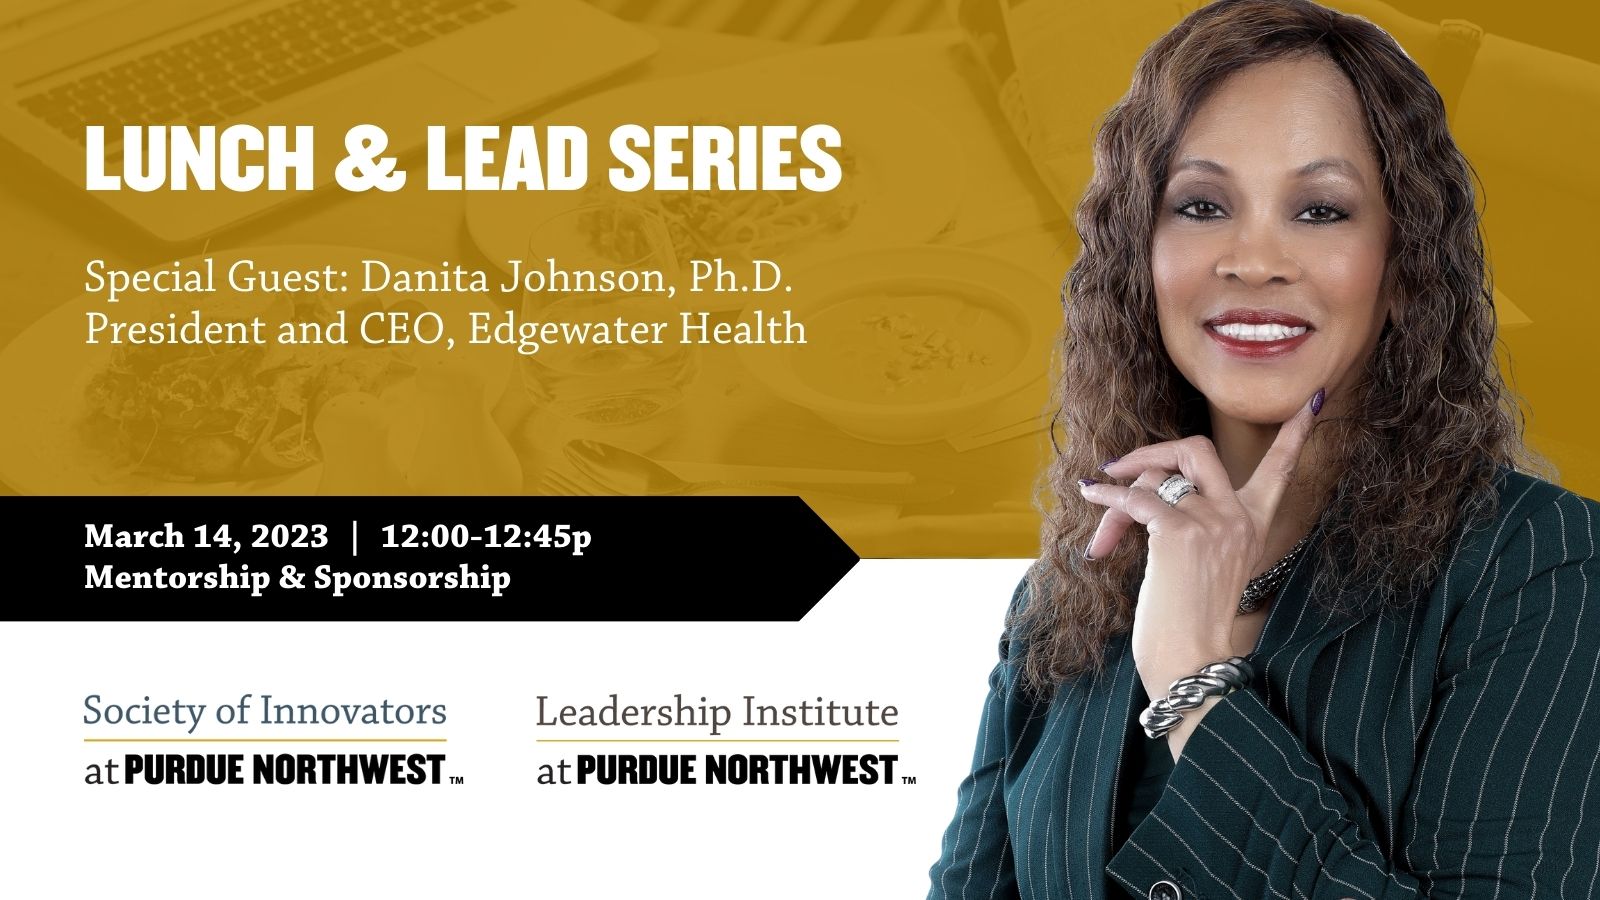 Graphic: Danita Johnson for the Lunch and Lead Series at Purdue University Northwest, hosted by the Leadership Institute and Society of Innovators.